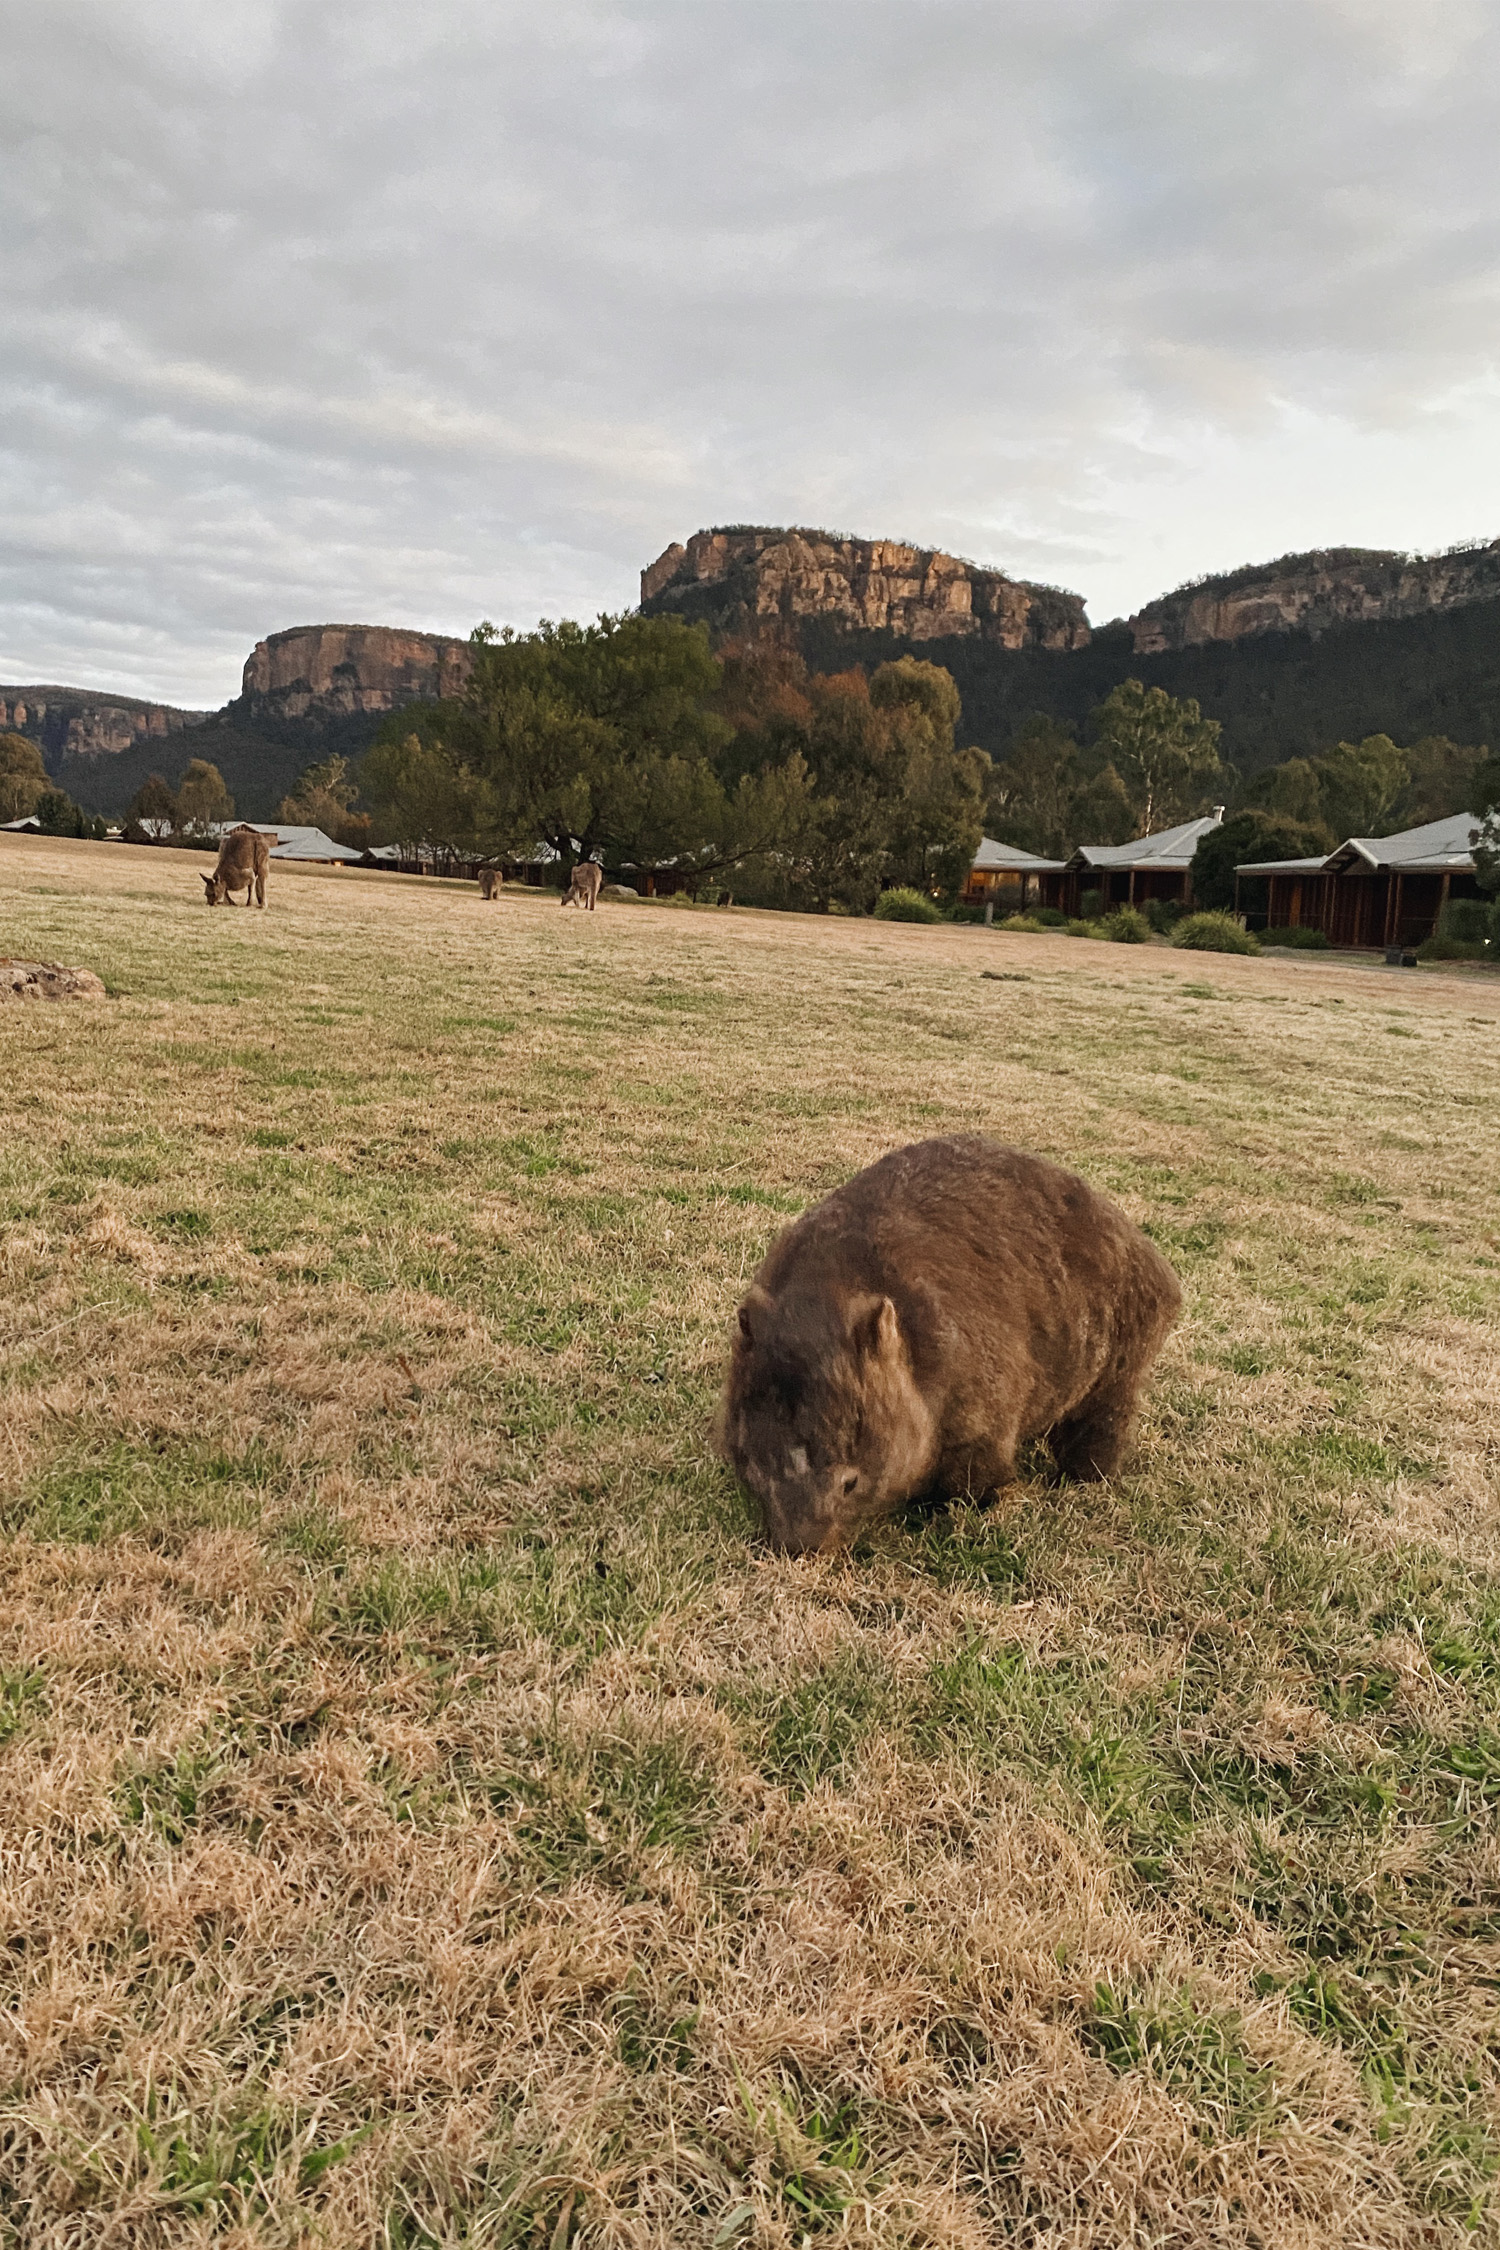 Emirates One and Only Wolgan Valley Wombat